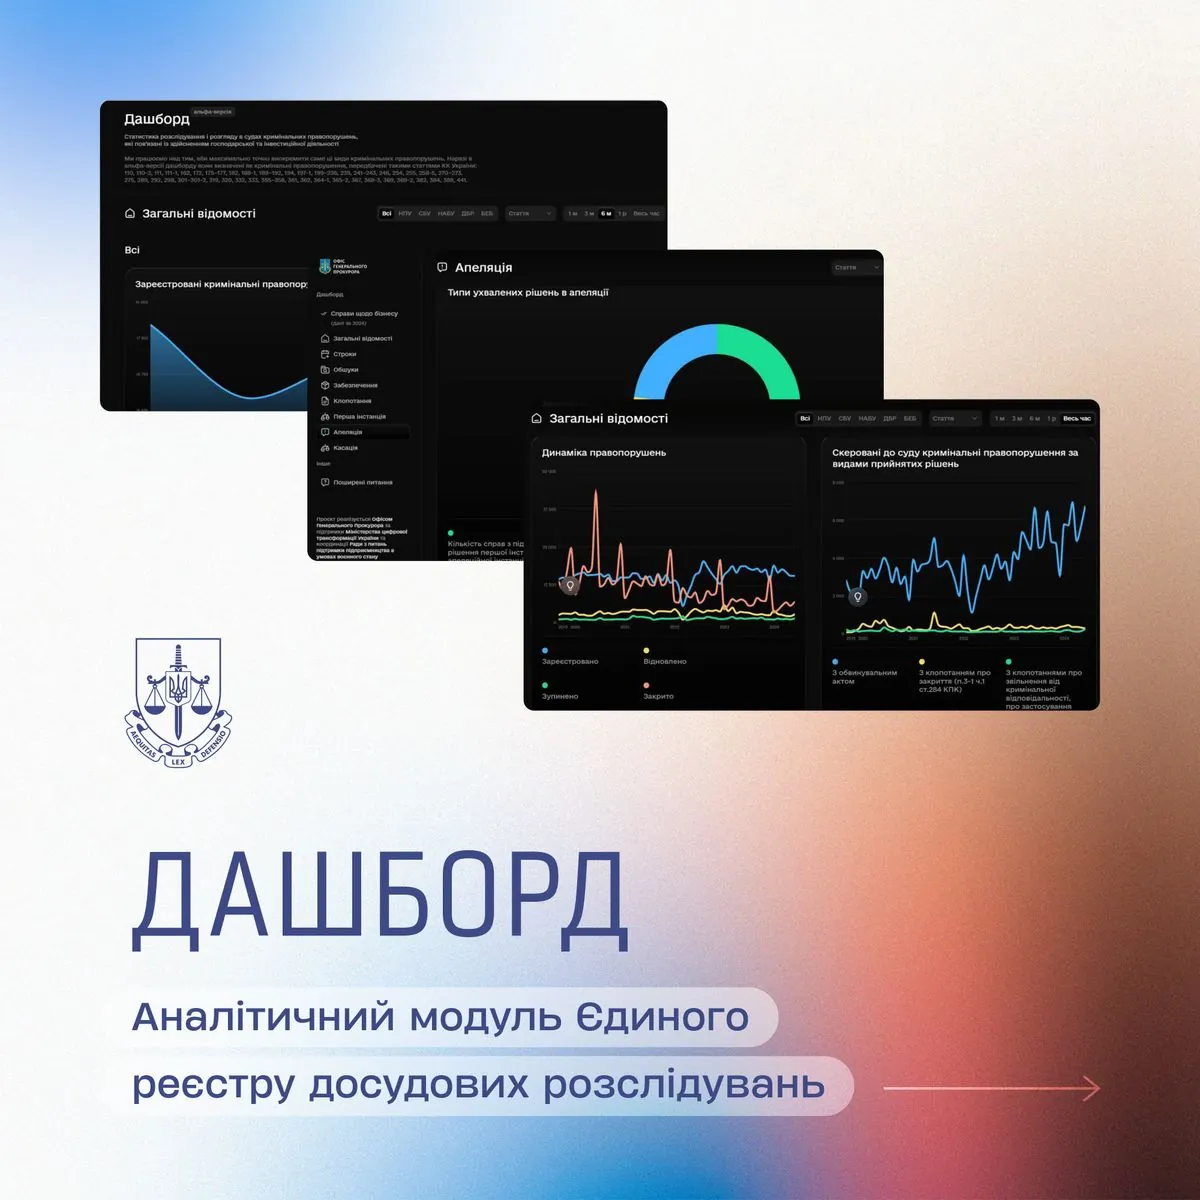 beta-version-of-the-dashboard-with-data-from-the-unified-register-of-pre-trial-investigations-on-business-proceedings-has-been-launched-in-ukraine